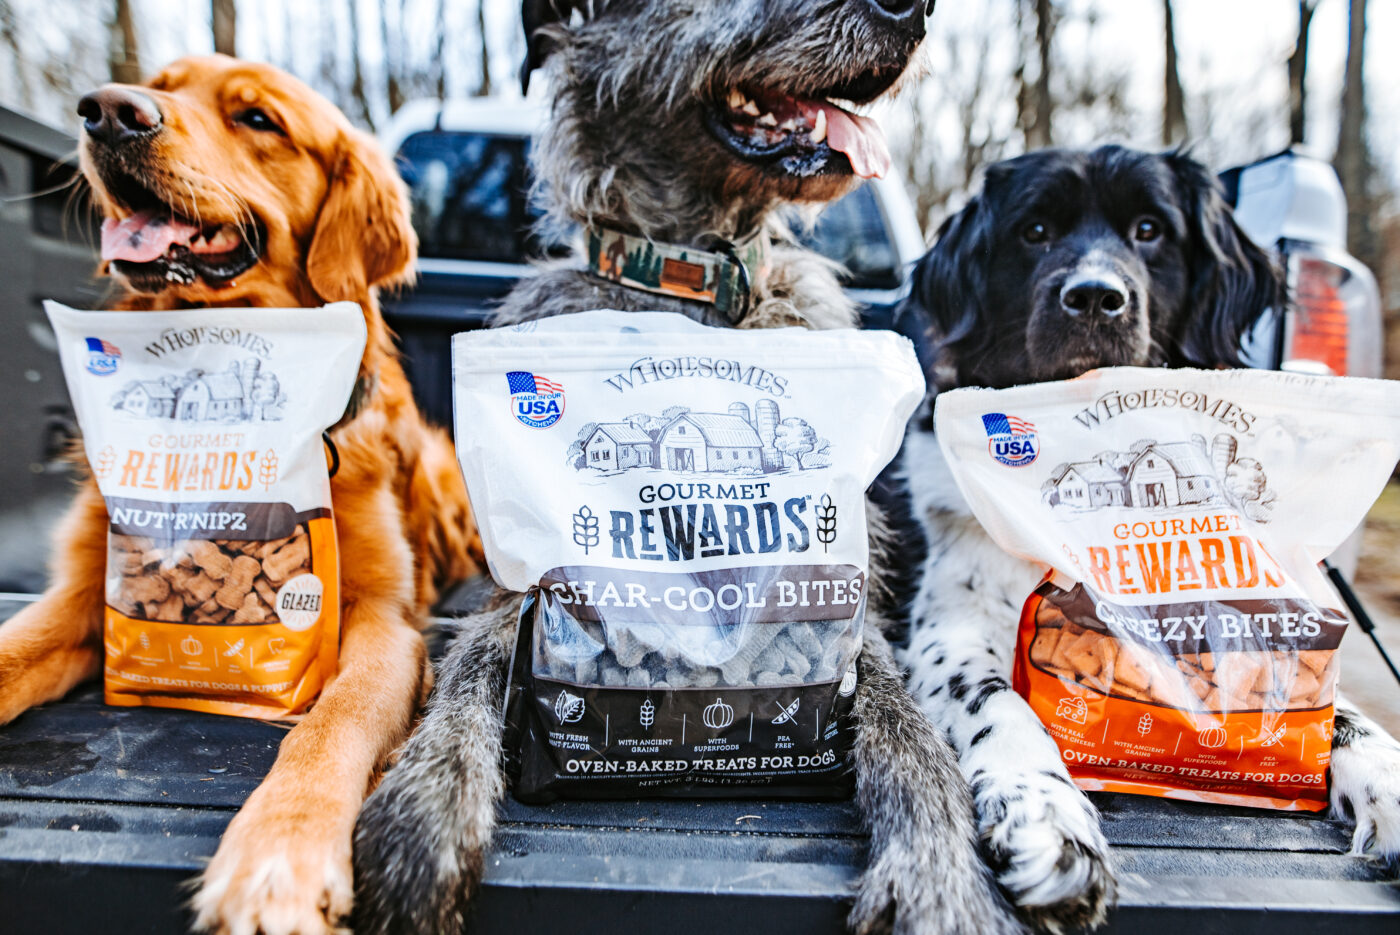 Three dogs lay in the back of a truck, each with a bag of Wholesomes Rewards dog treats